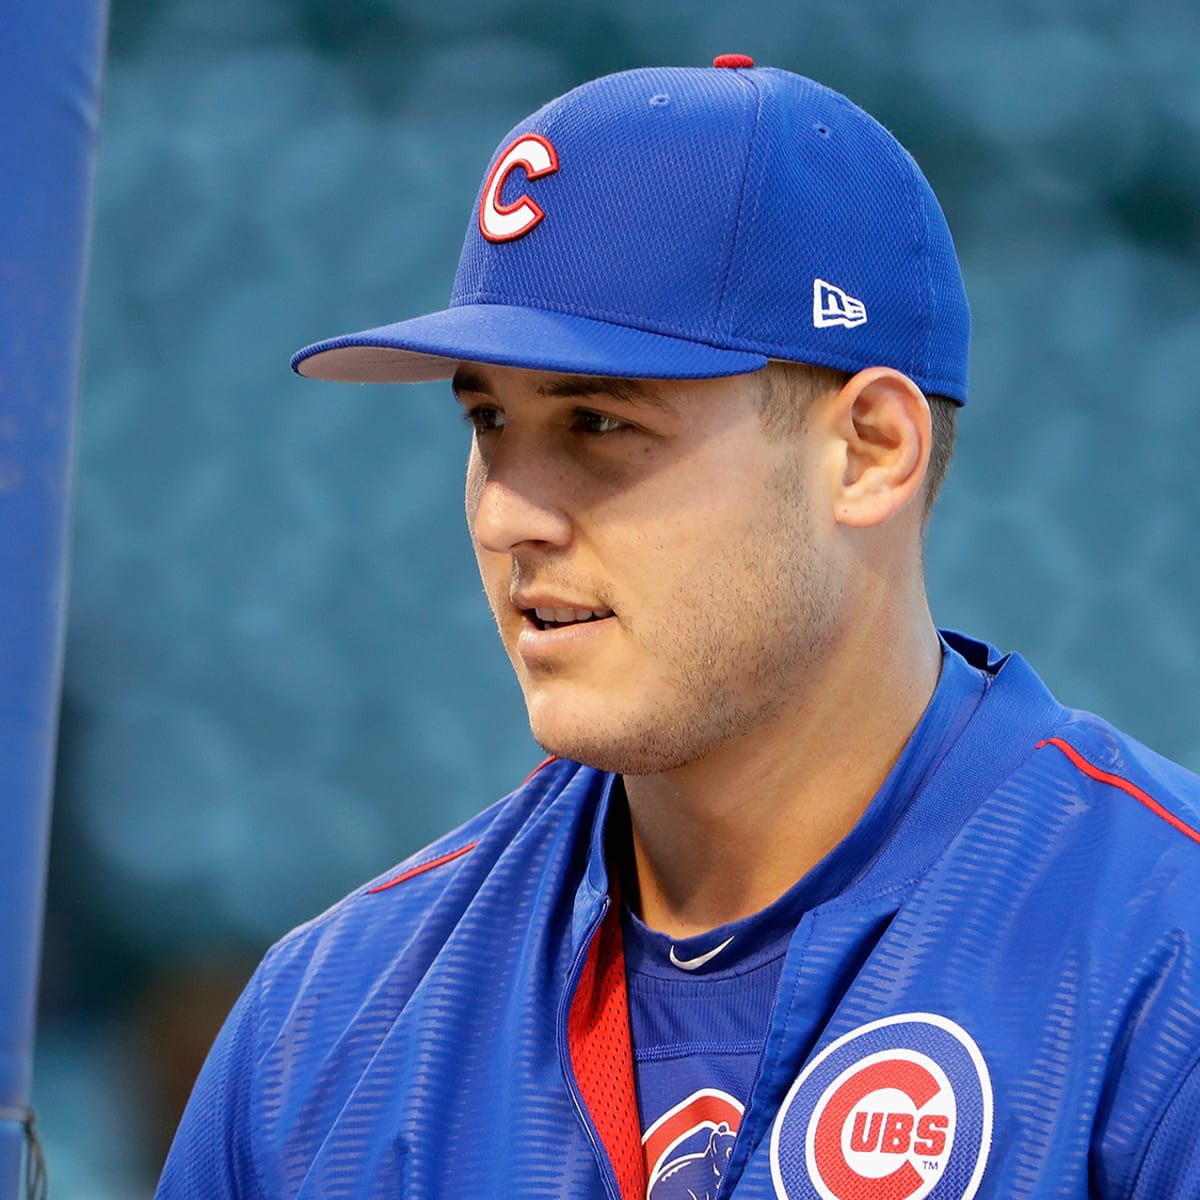 Cubs' Anthony Rizzo heads to Florida to offer support in wake of shooting  at his former high school – The Denver Post